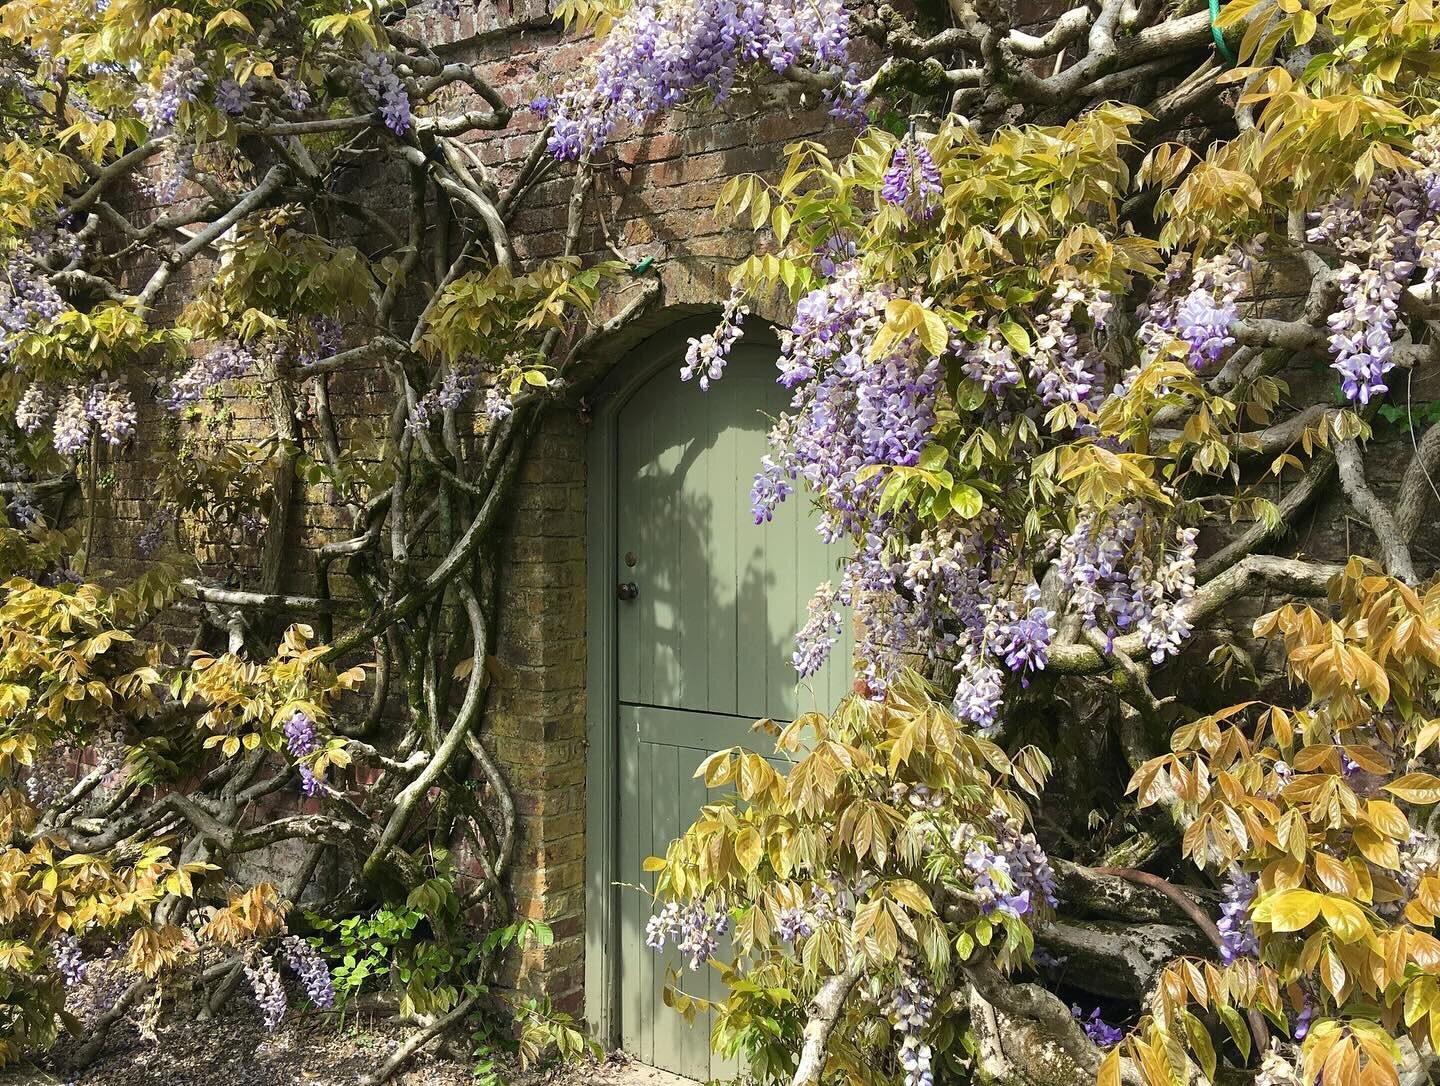 How long til spring?!

If you&rsquo;re a garden lover, spring is the most wonderful time to visit Cornwall. All of our great gardens bursting into bloom, like this wisteria at Trelissick, and the rhododendron and camellia at Heligan and Caerhays. 

W